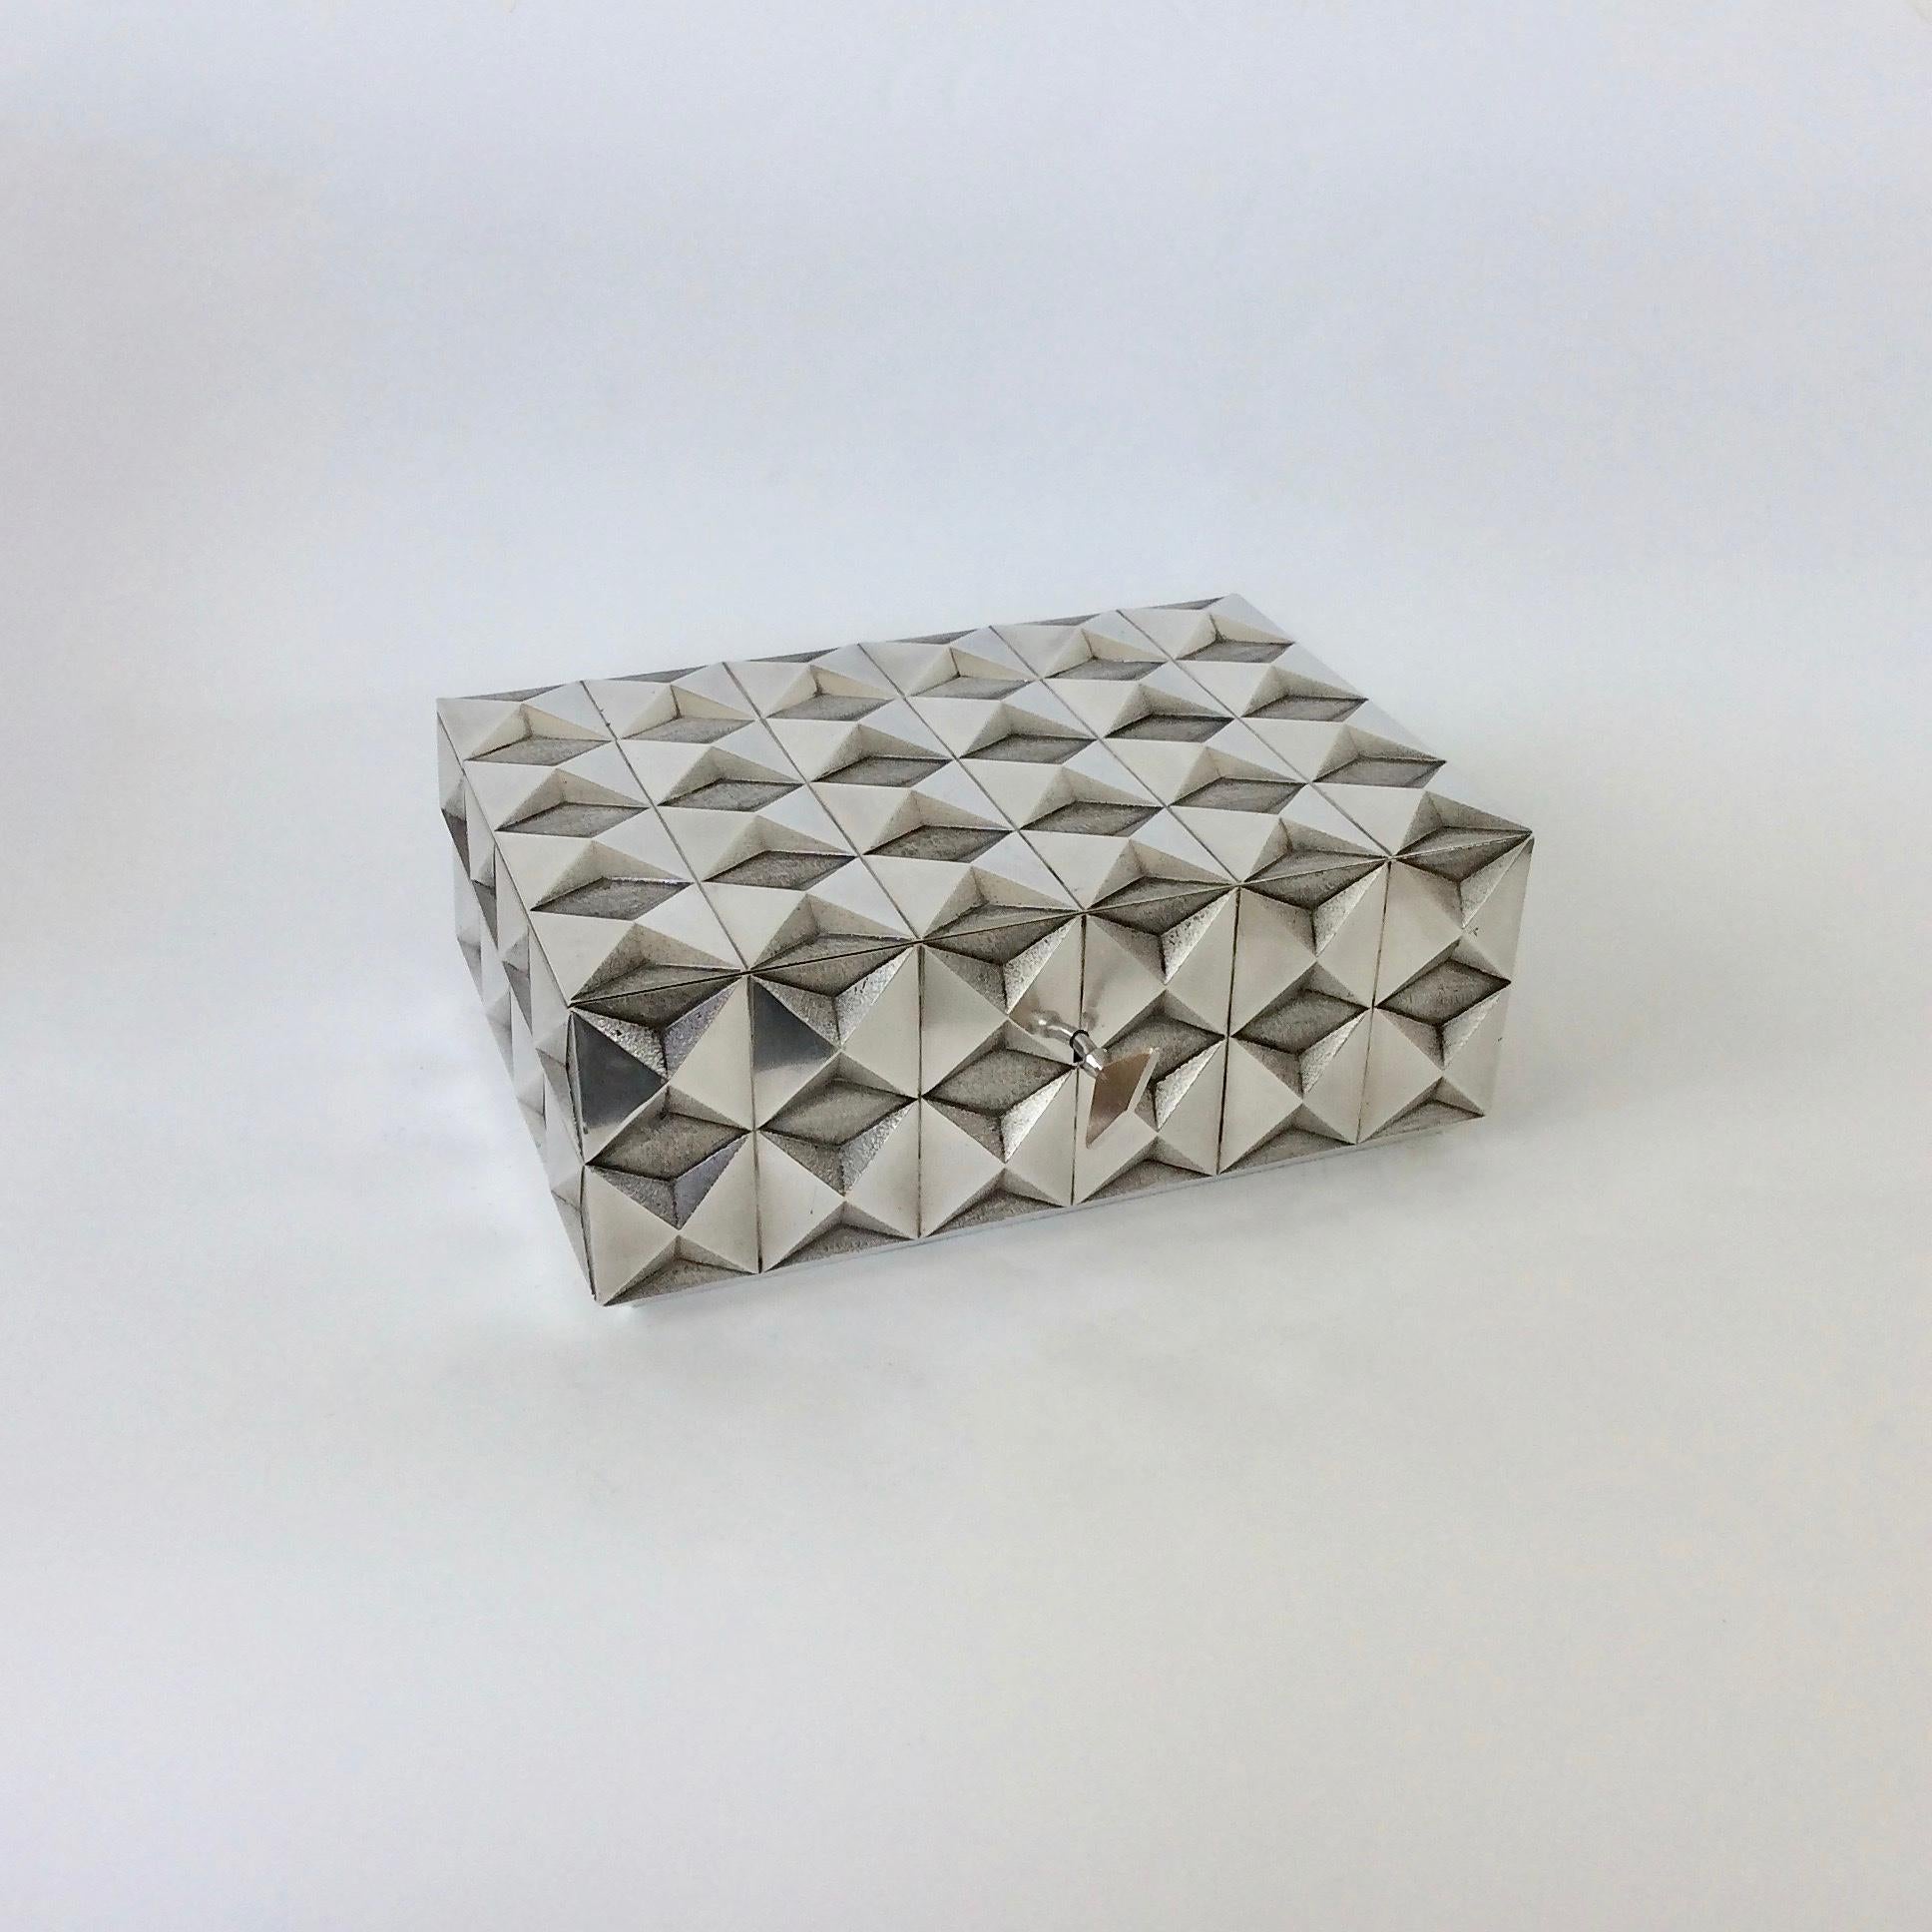 Diamond Point Silver Plated Metal Box, Unique C. 1970s, France For Sale 8